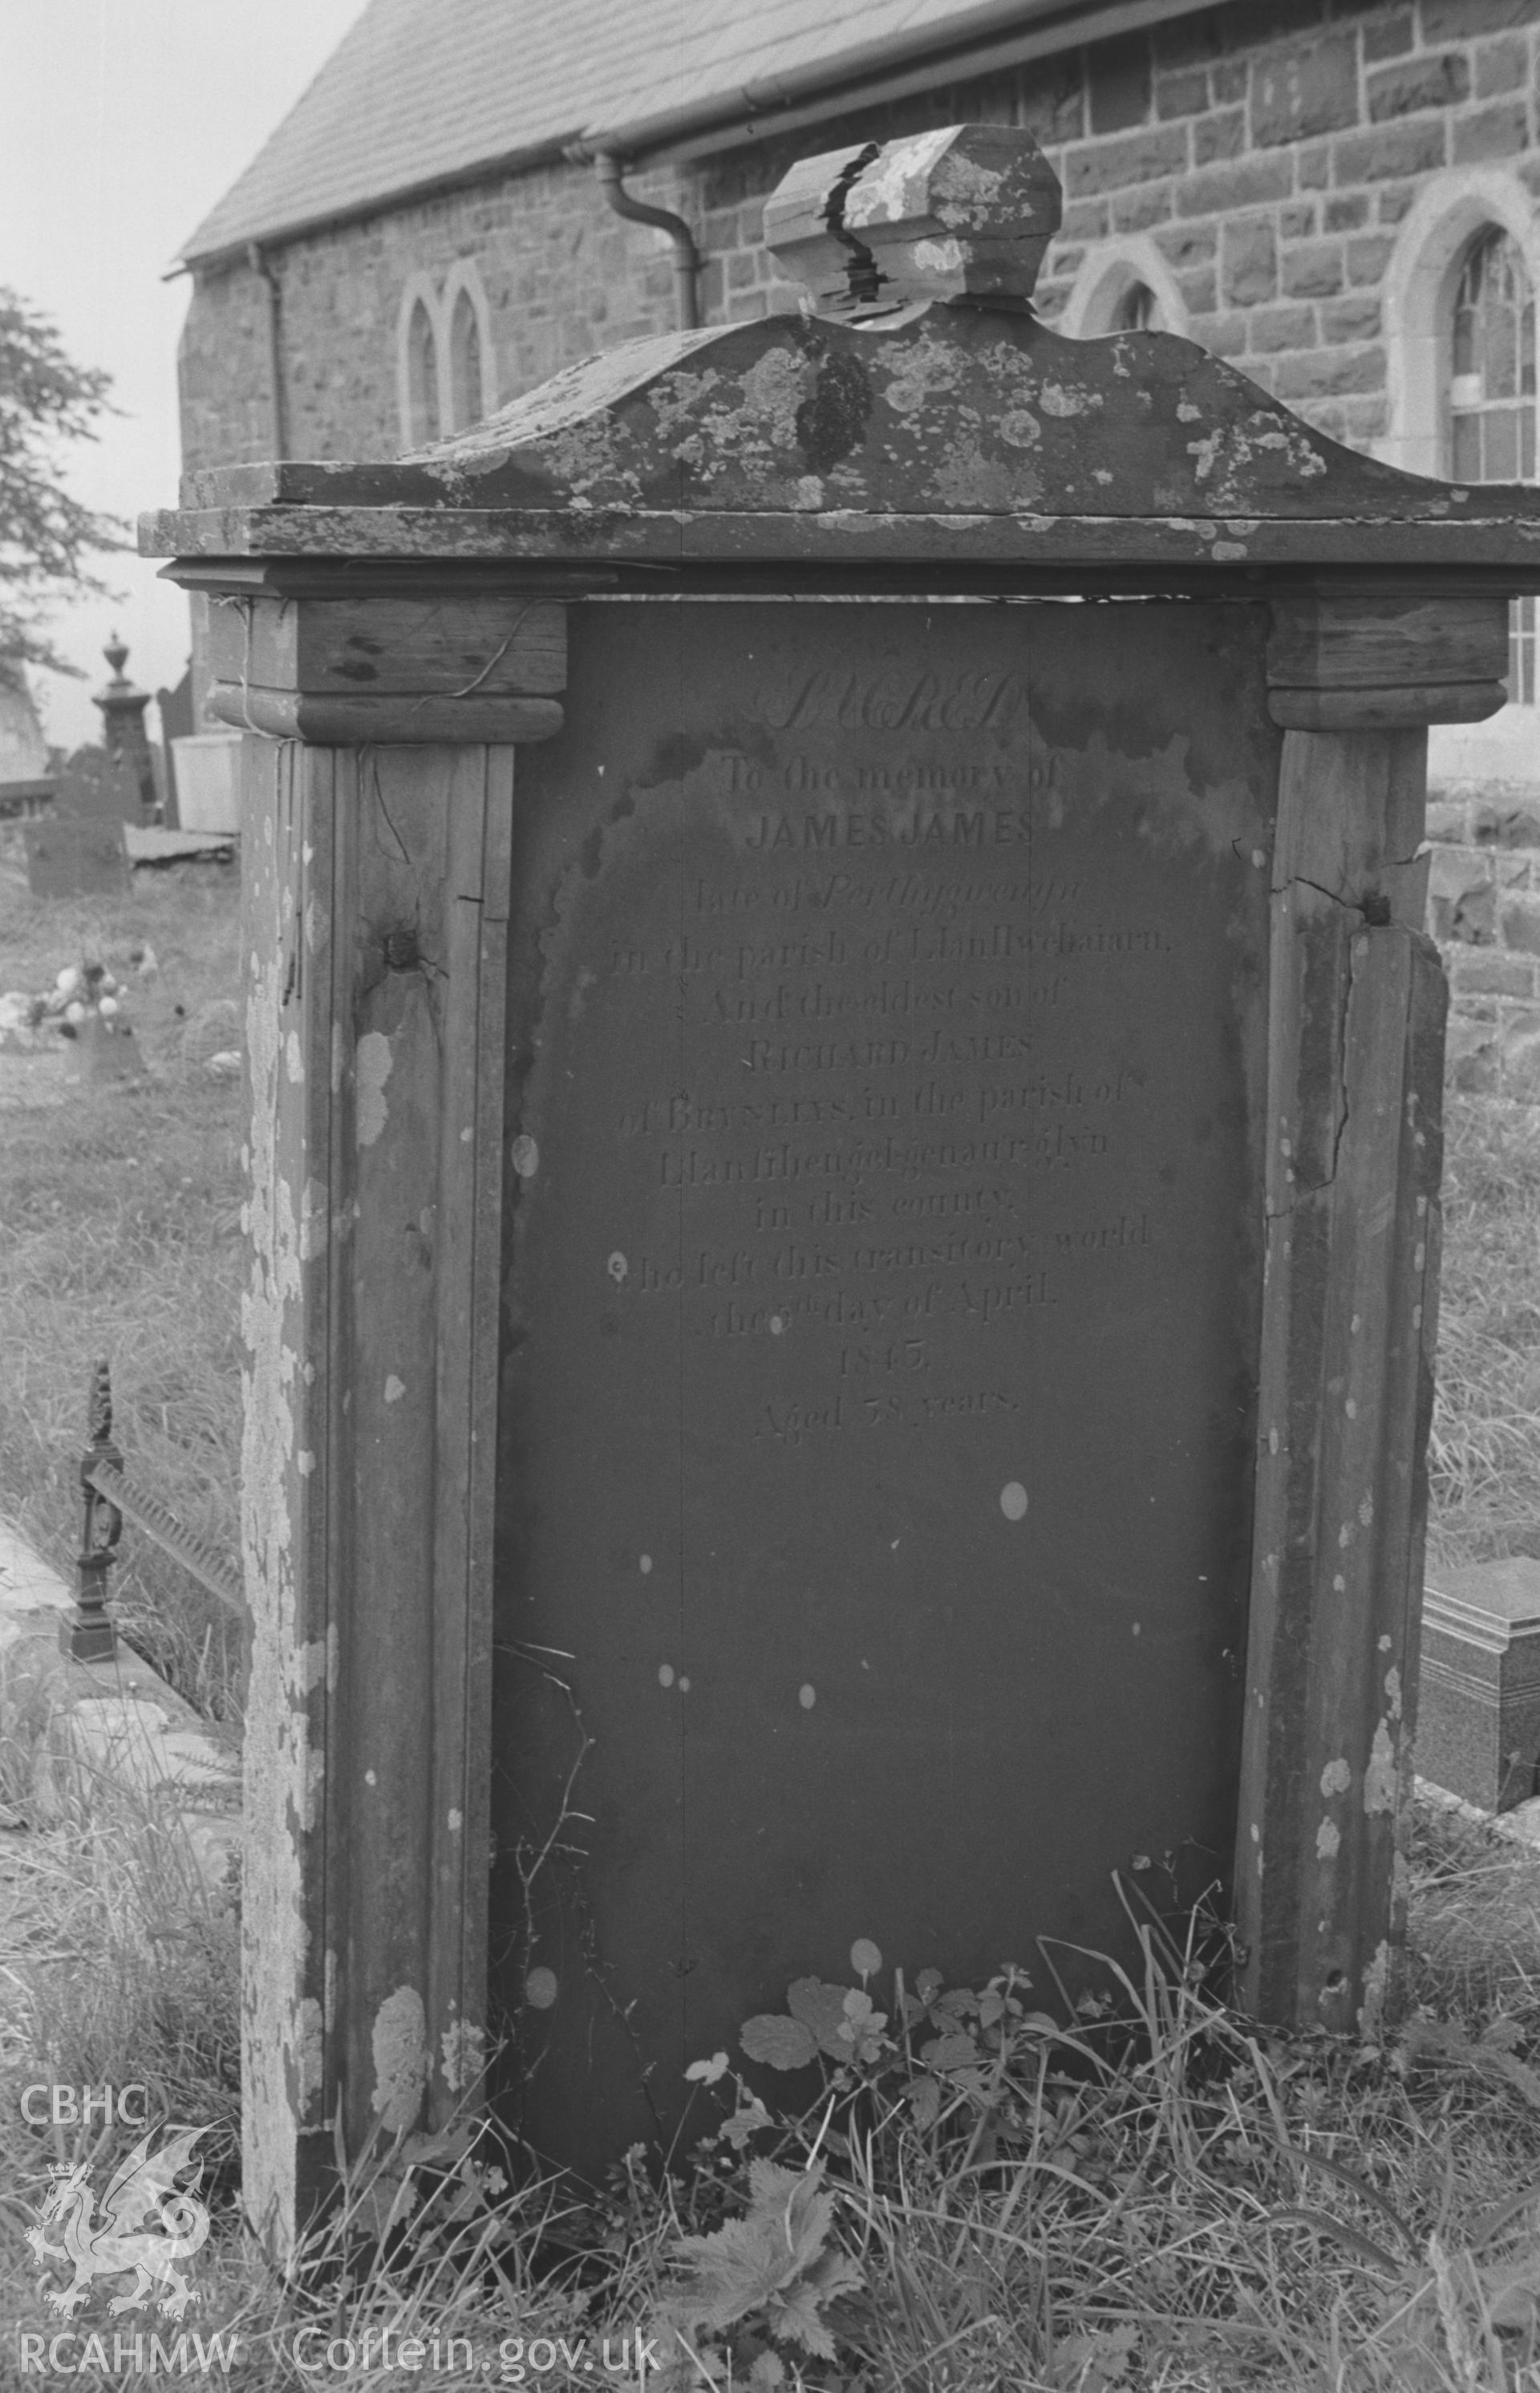 Digital copy of a black and white negative showing 1845 gravestone to the memory of James James at St. David's Church, Henfynyw, Aberaeron. Photographed by Arthur O. Chater on 5th September 1966 from Grid Reference SN 447 613.